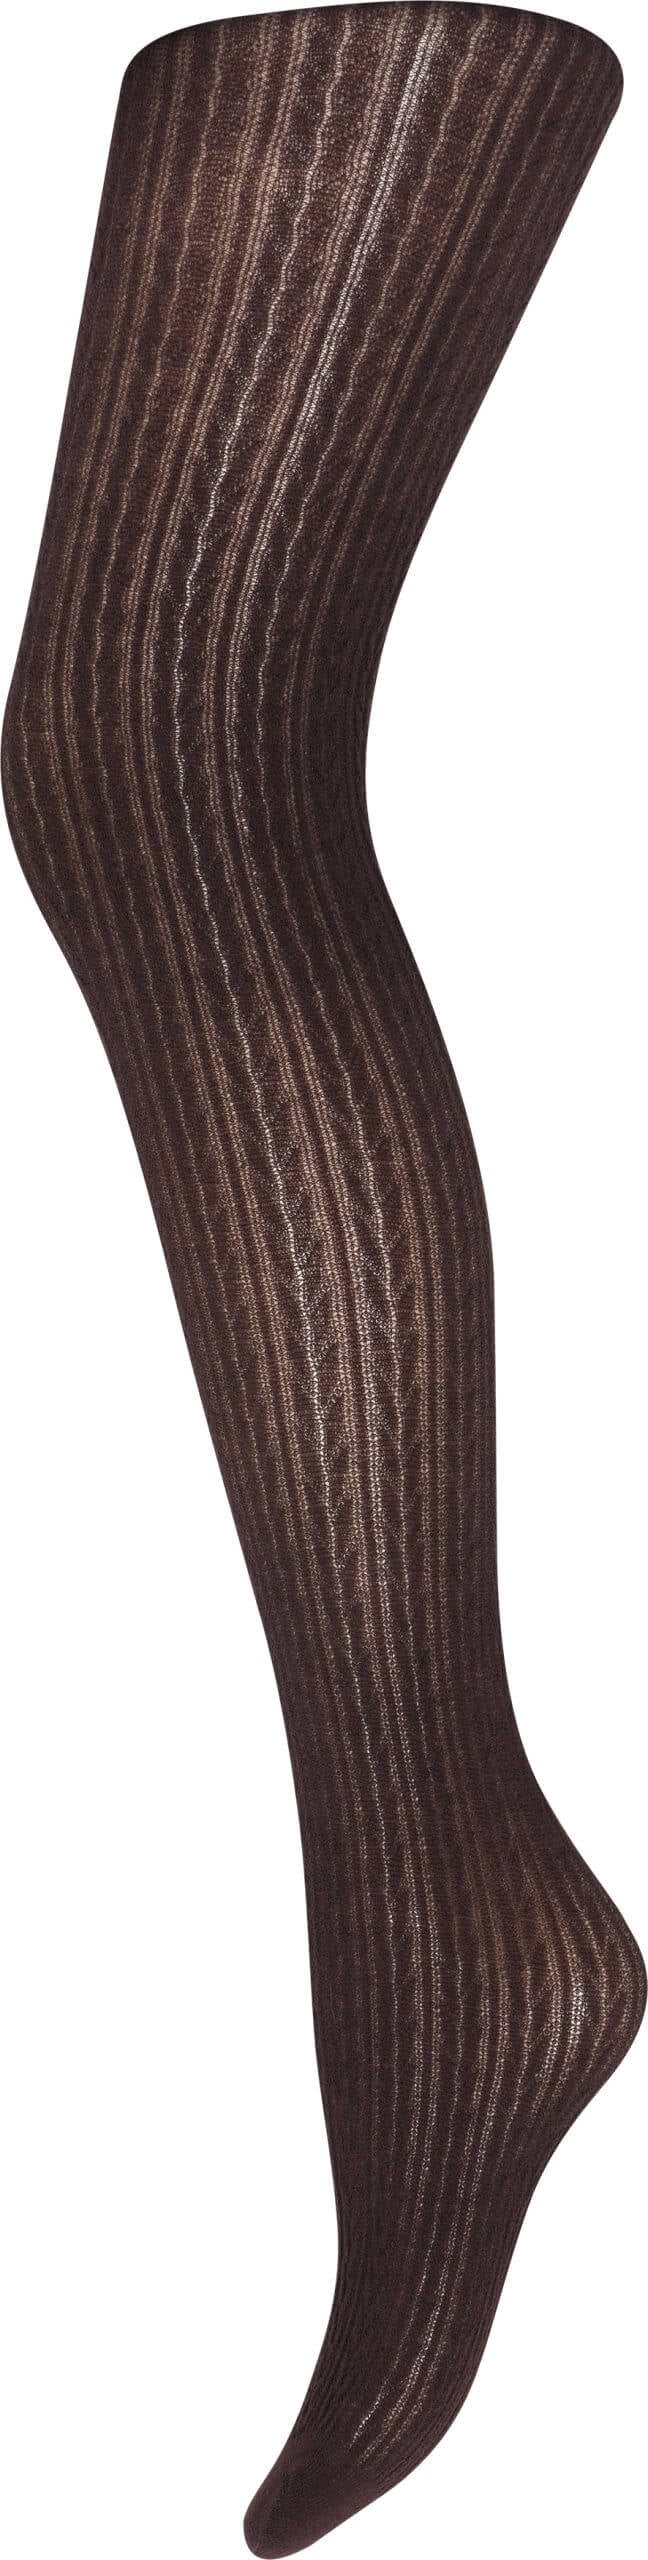 Decoy - Tights Bamboo 100 the Dark brown.